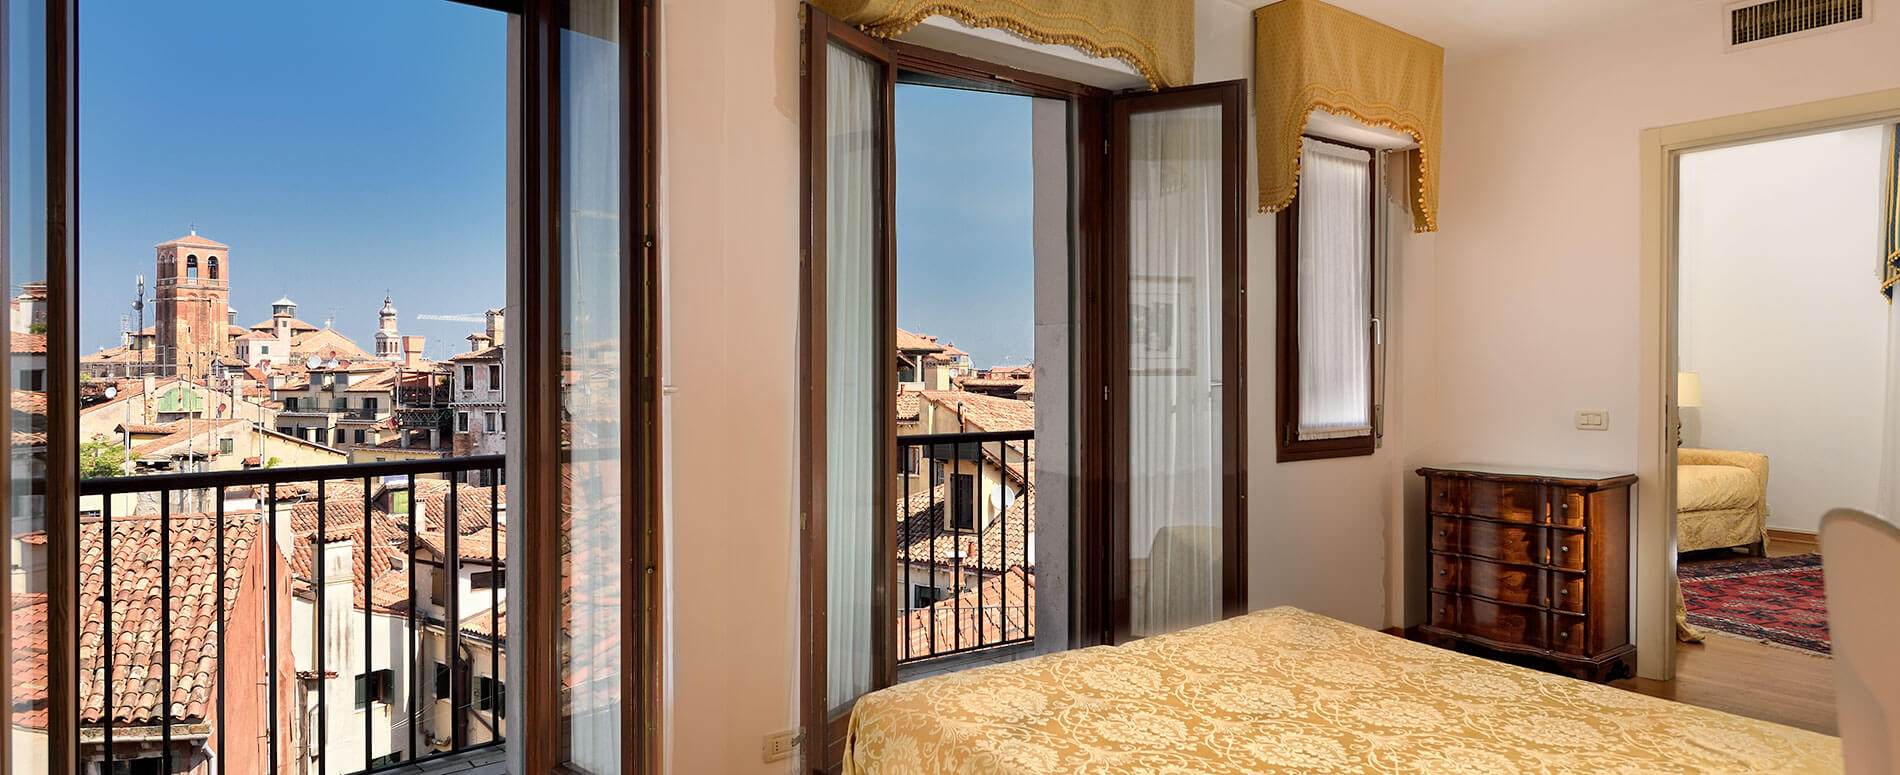 San Marco Palace Venice | Holiday Apartments Venice Canal View | Suite